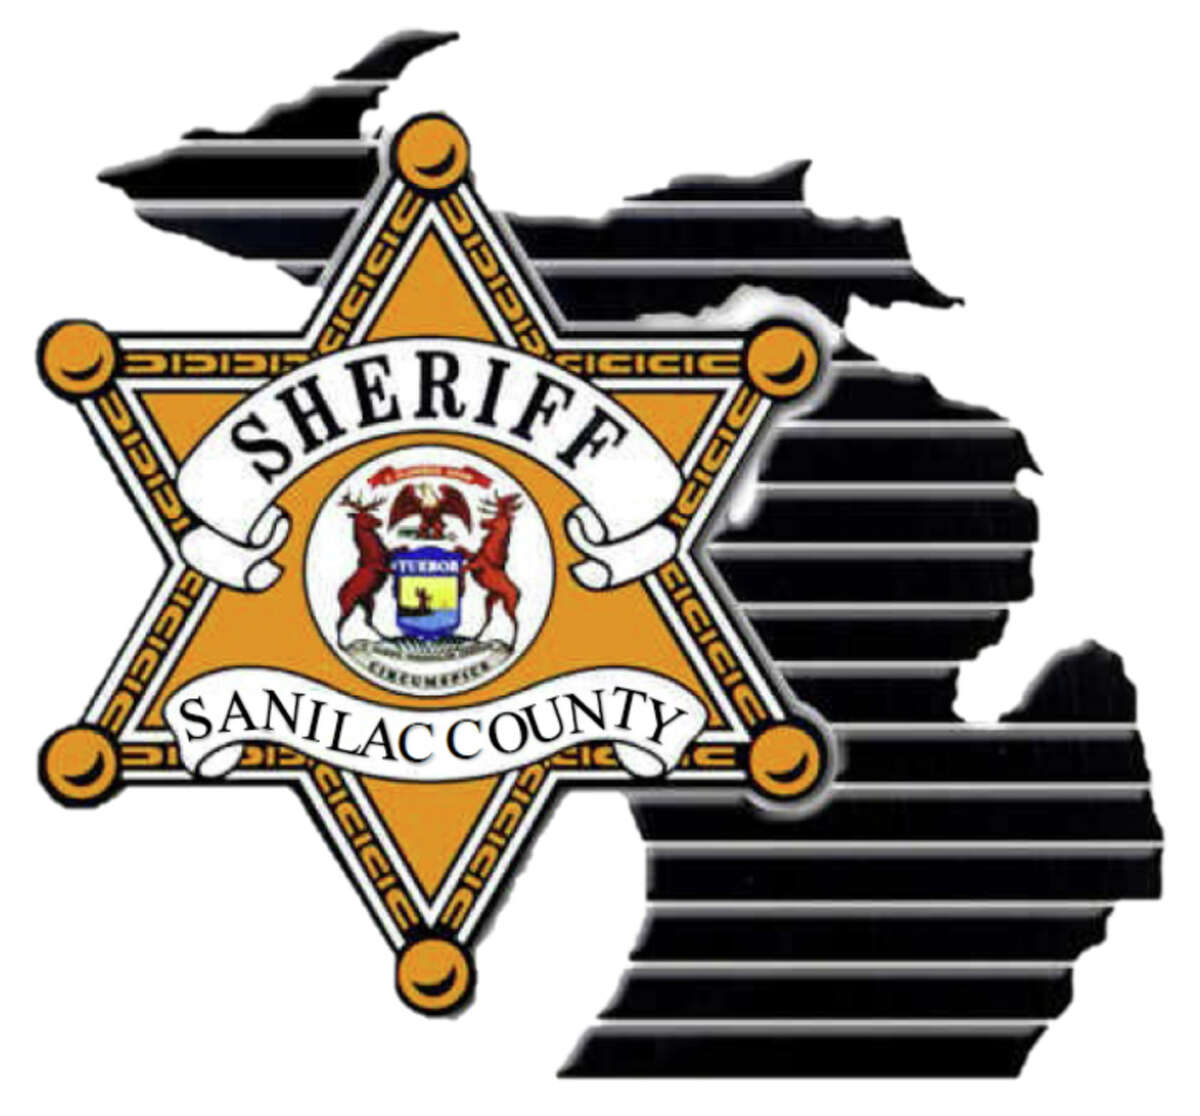 A motorcyclist was hurt early Tuesday, Sept. 20, when a deer collided with his Harley Davidson in Sanilac County's Washington Township.